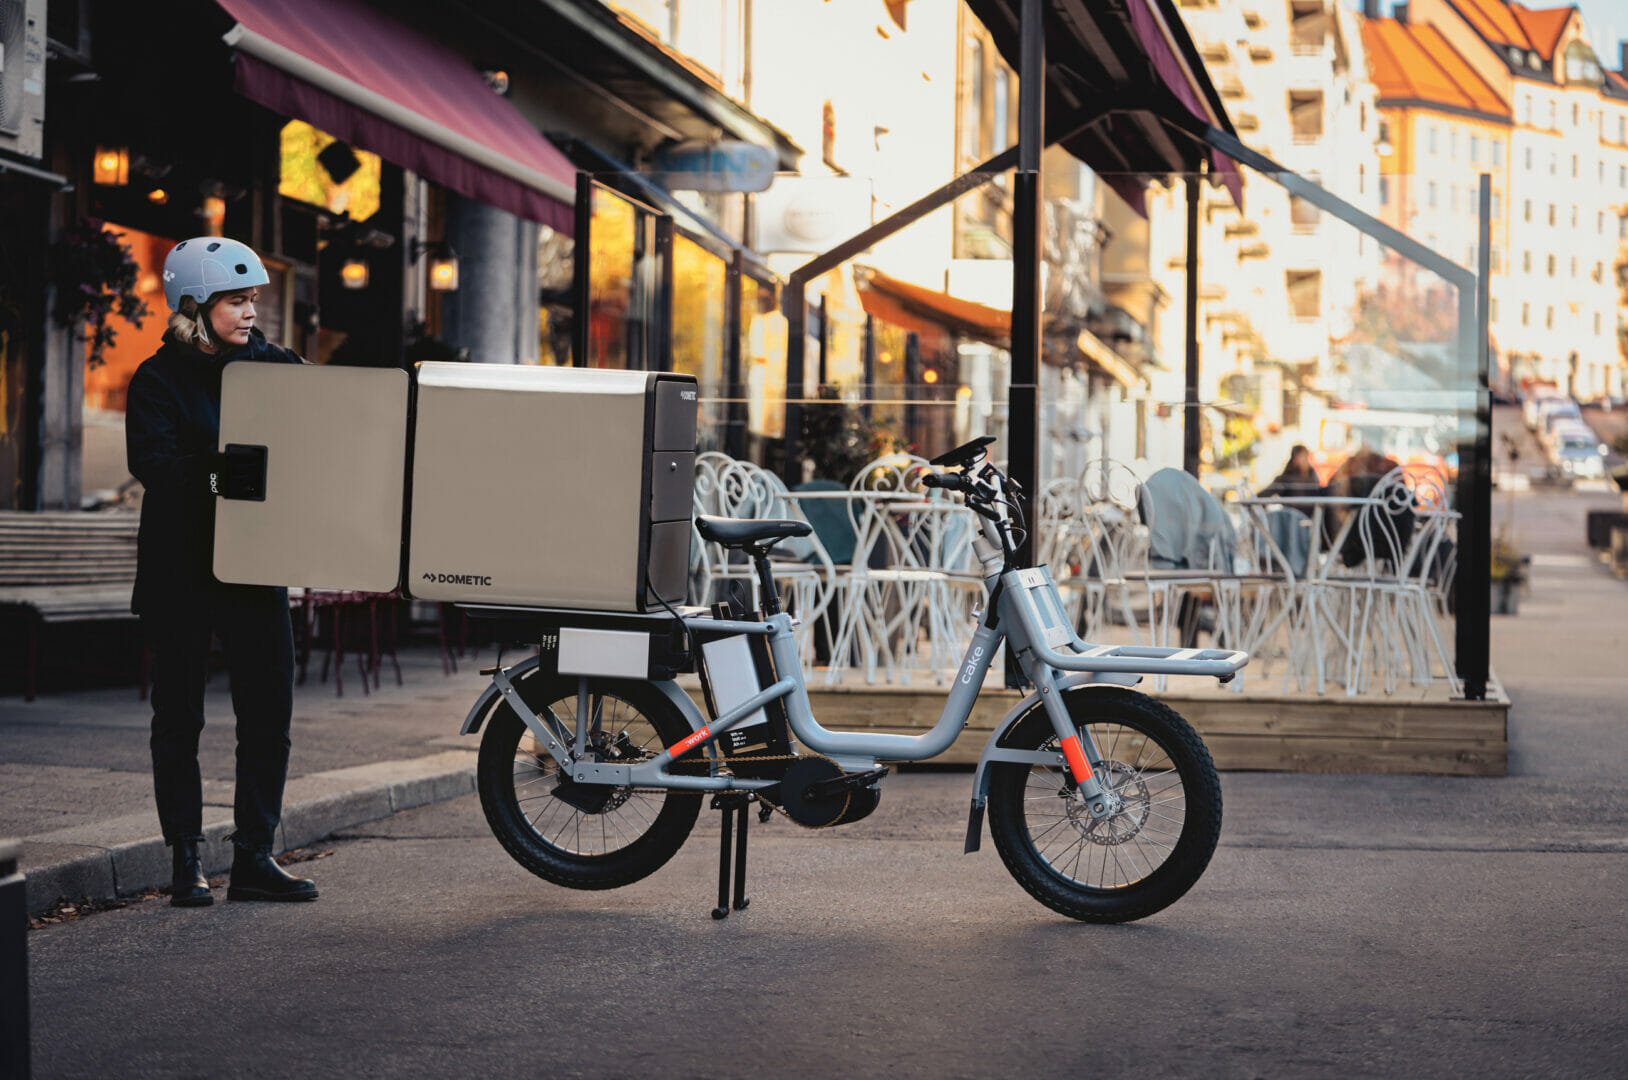 Dometic and CAKE partner on first food delivery contract in Italy